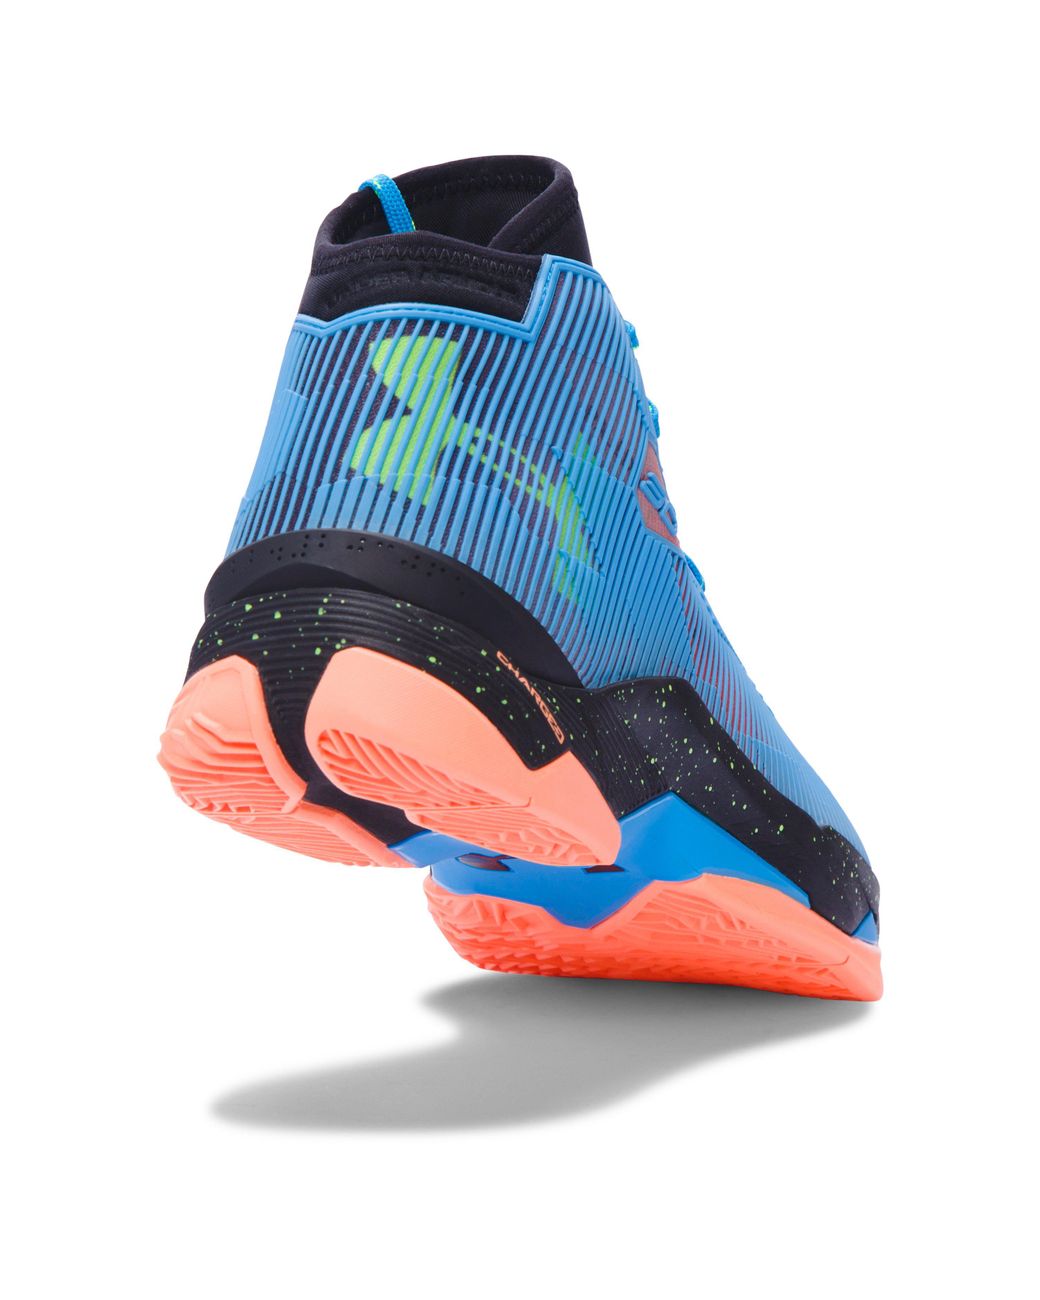 Under Armour Men's Ua Curry  — Limited Edition Basketball Shoes for Men  | Lyst